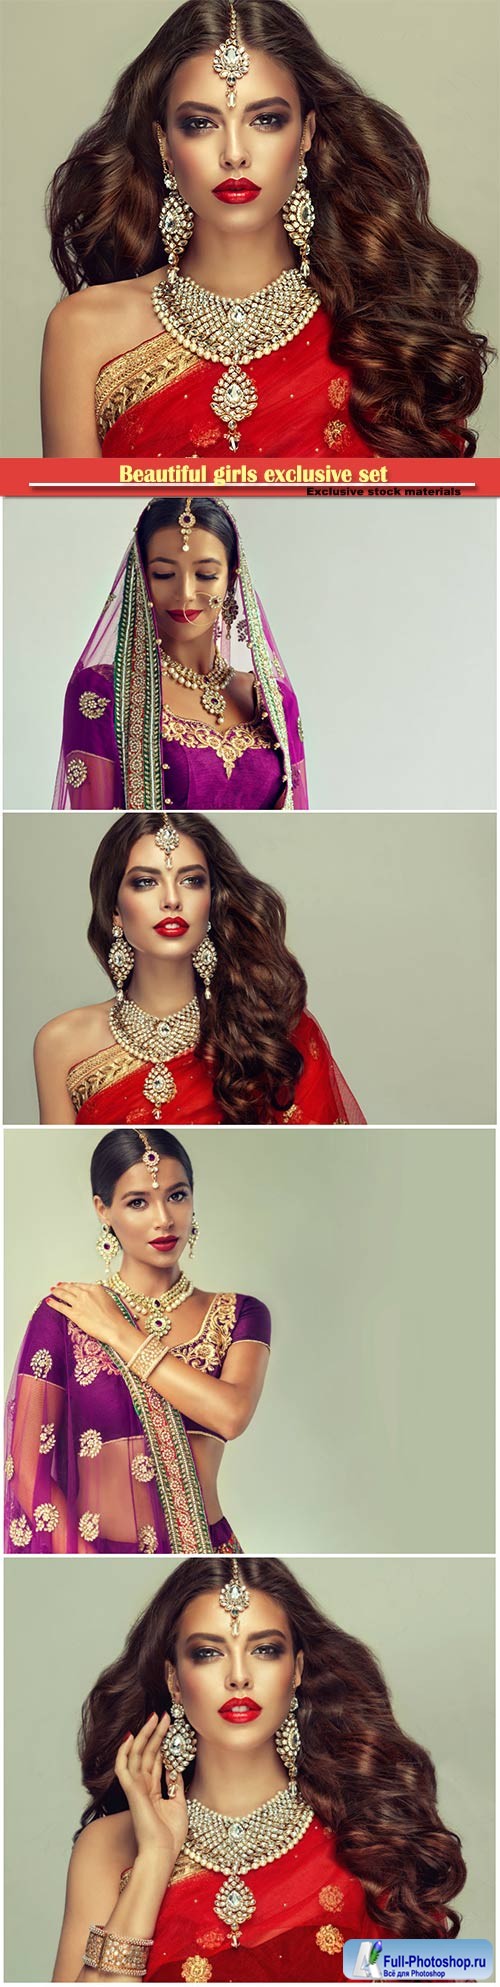 Beautiful Indian girls with precious jewels